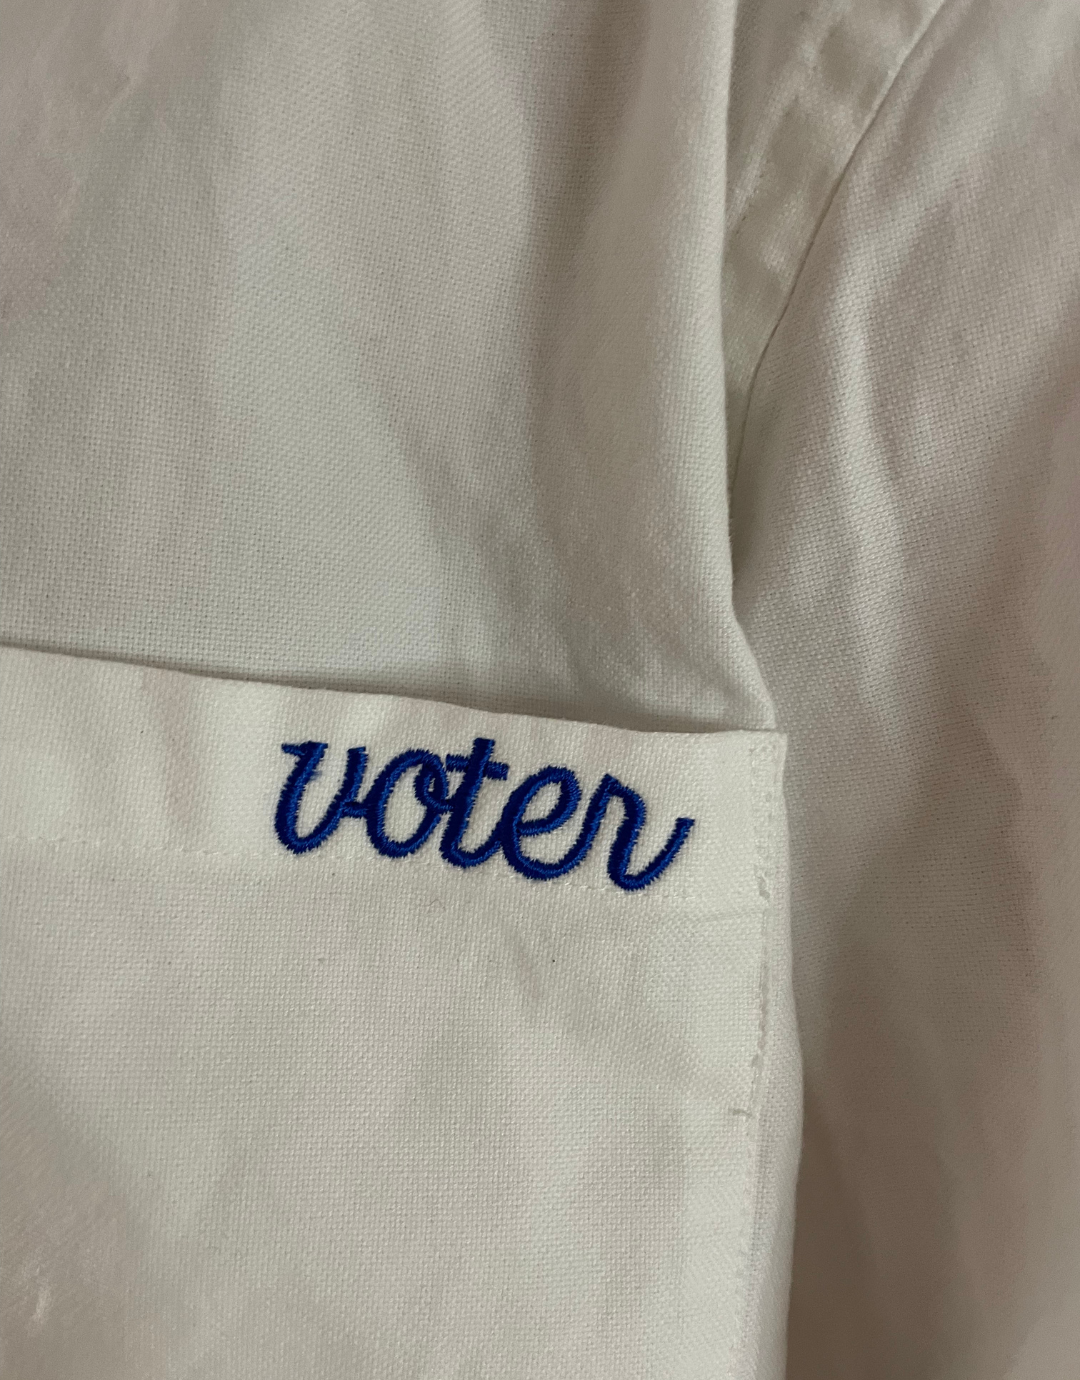 Voter Cotton Upcycled Embroidered Shirt